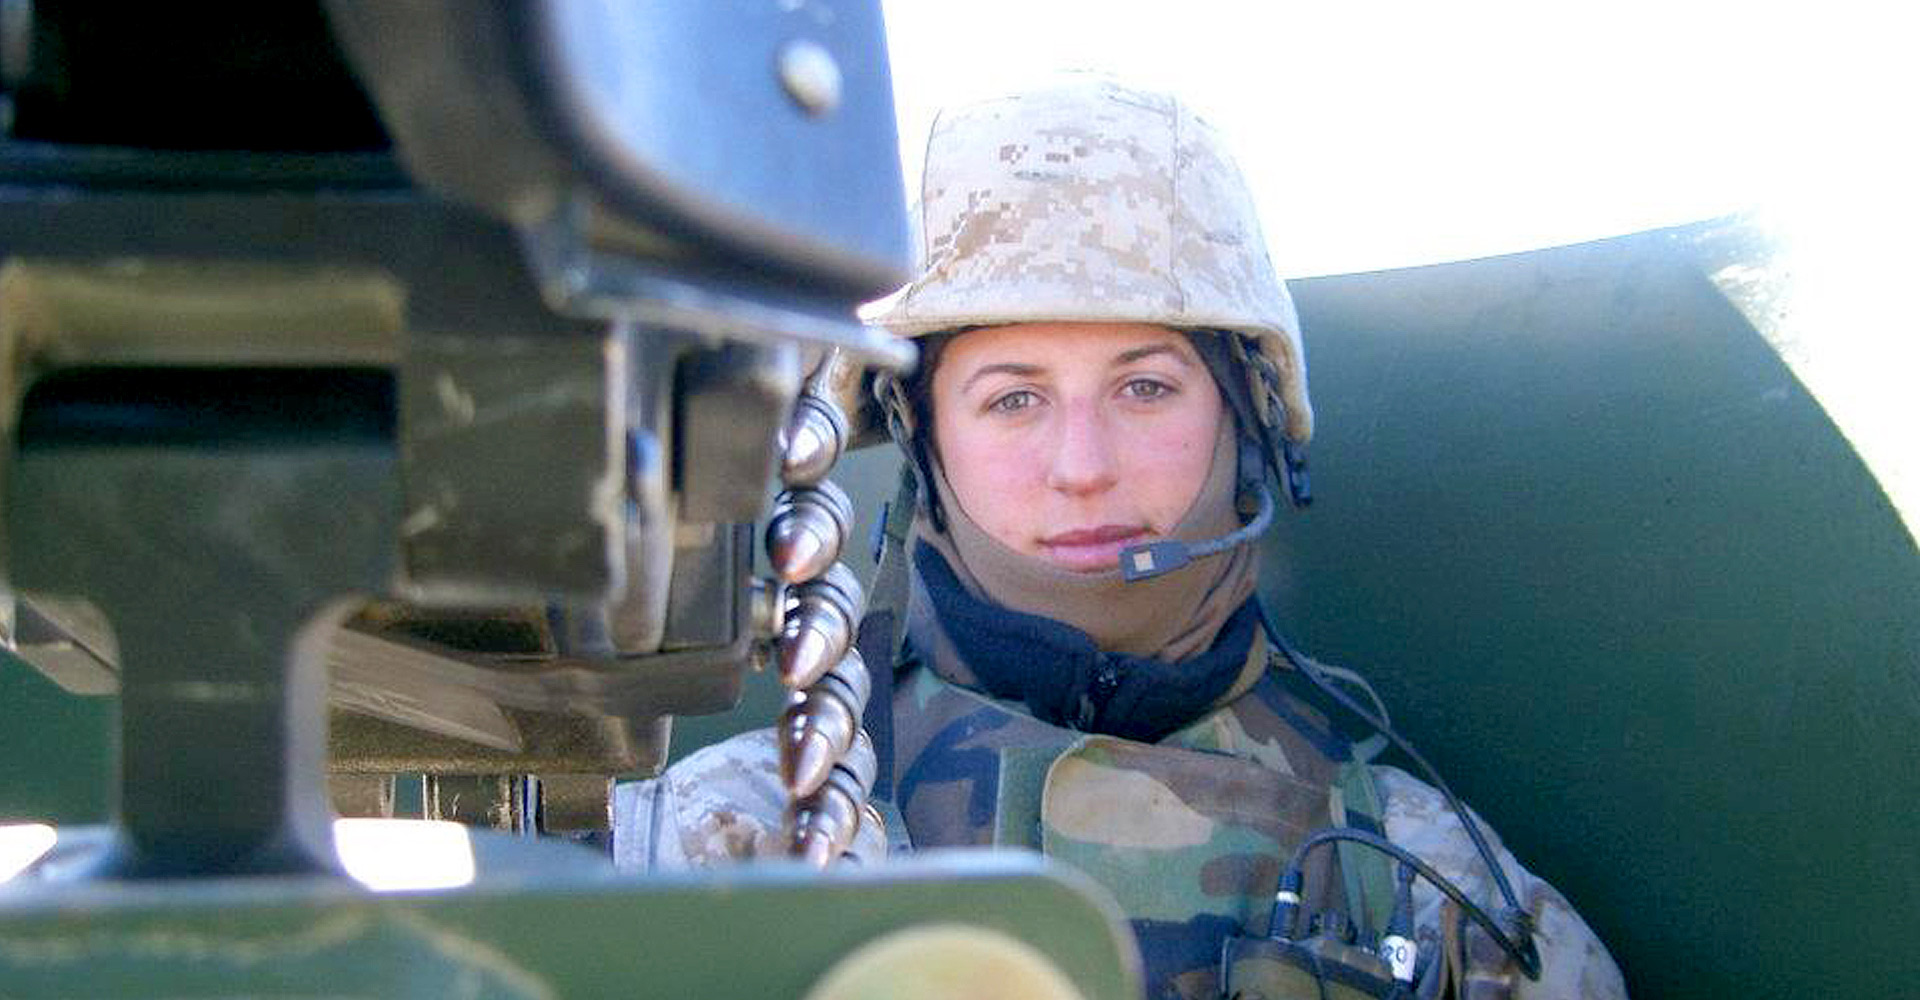 Missing in action: support for female veterans